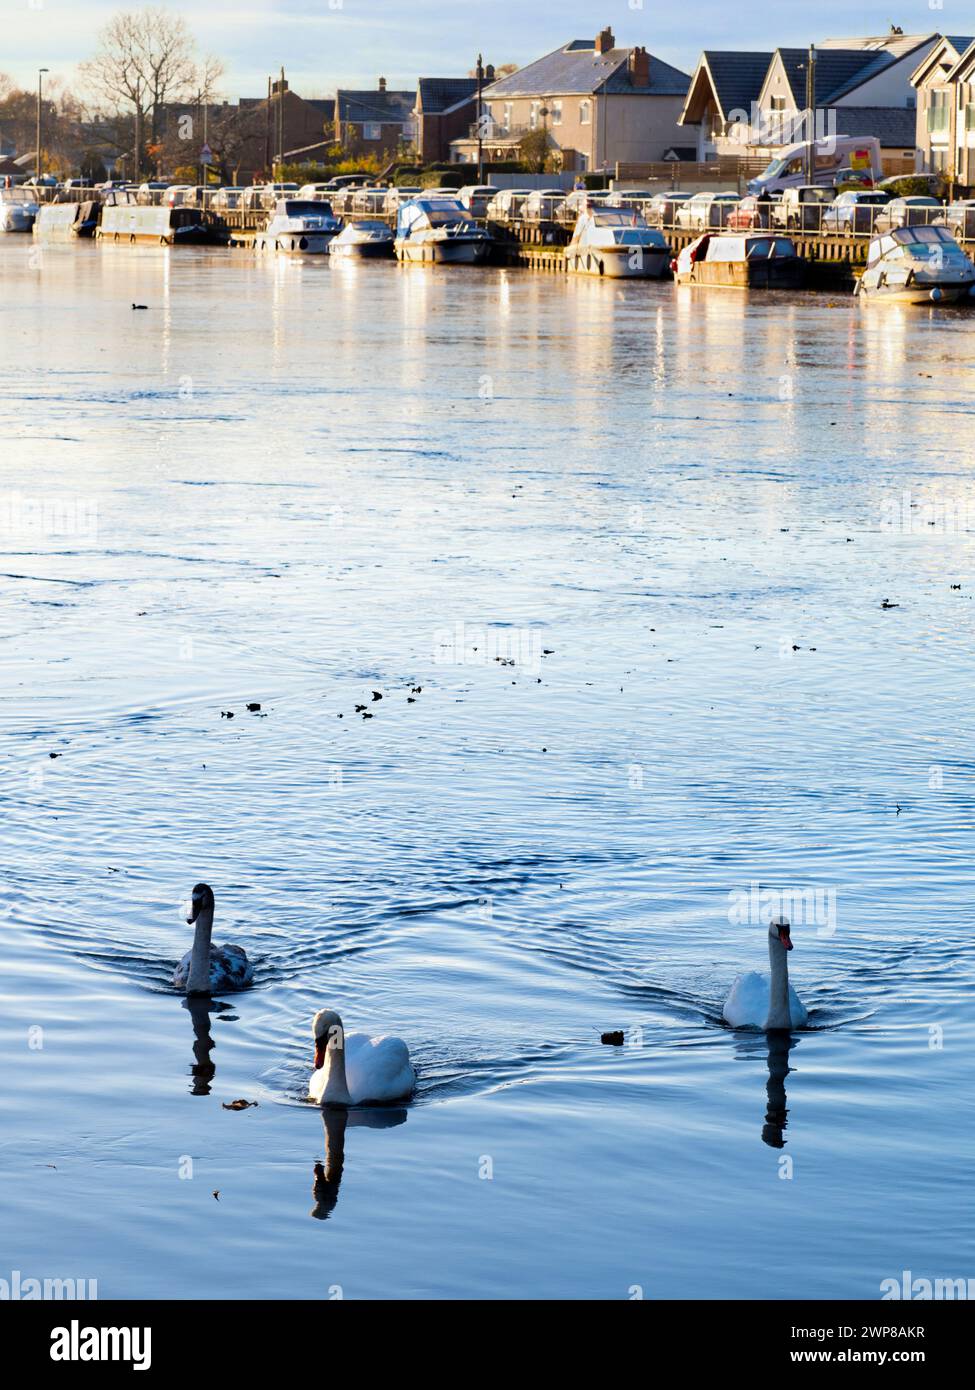 Abingdon claims to be the oldest town in England. And this is the view down the Thames towards its classy marina. It's mid-winter and three swans are Stock Photo